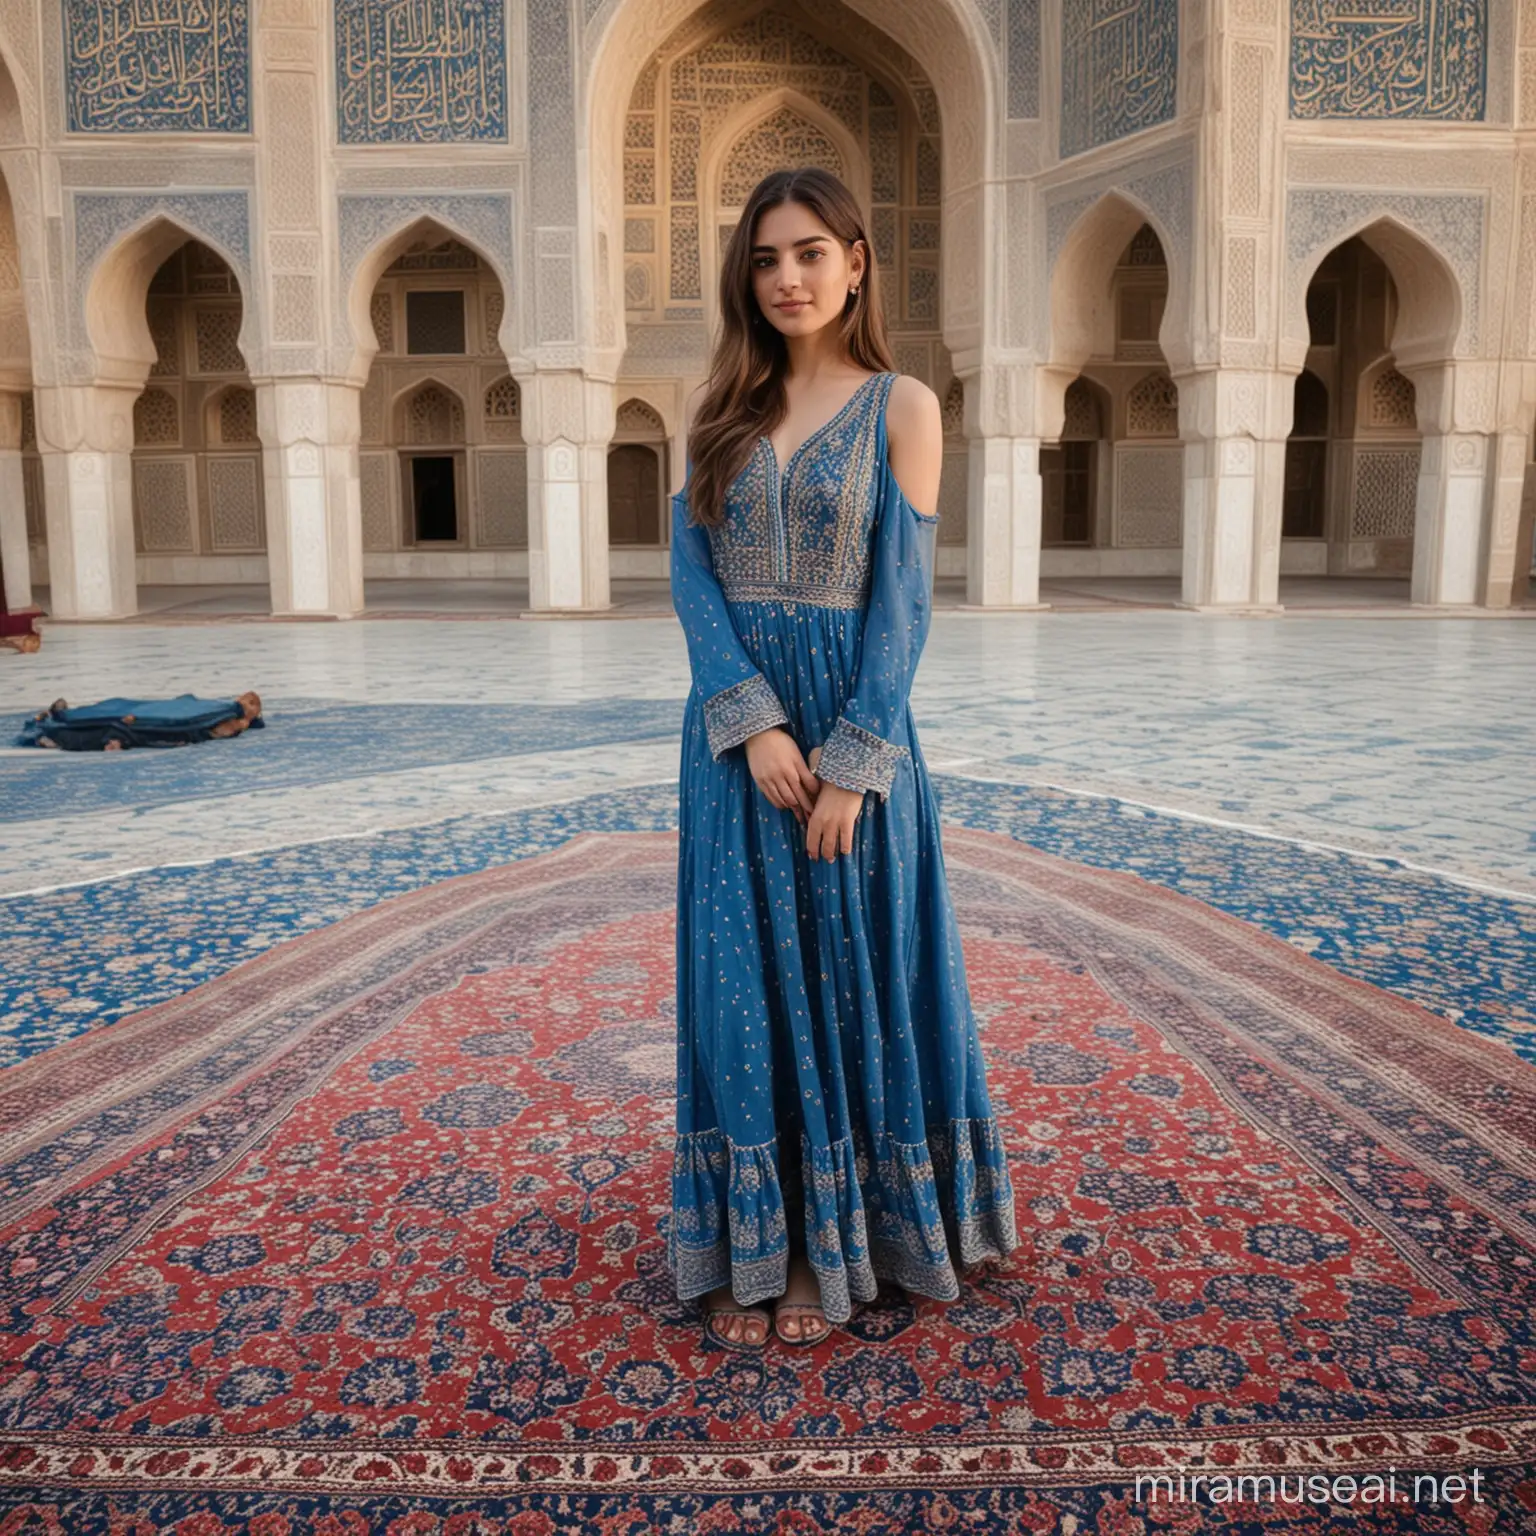 persian girl in an persian blue dress standing in the middle of the persian blue carpet from a front angle with the background of the mosque